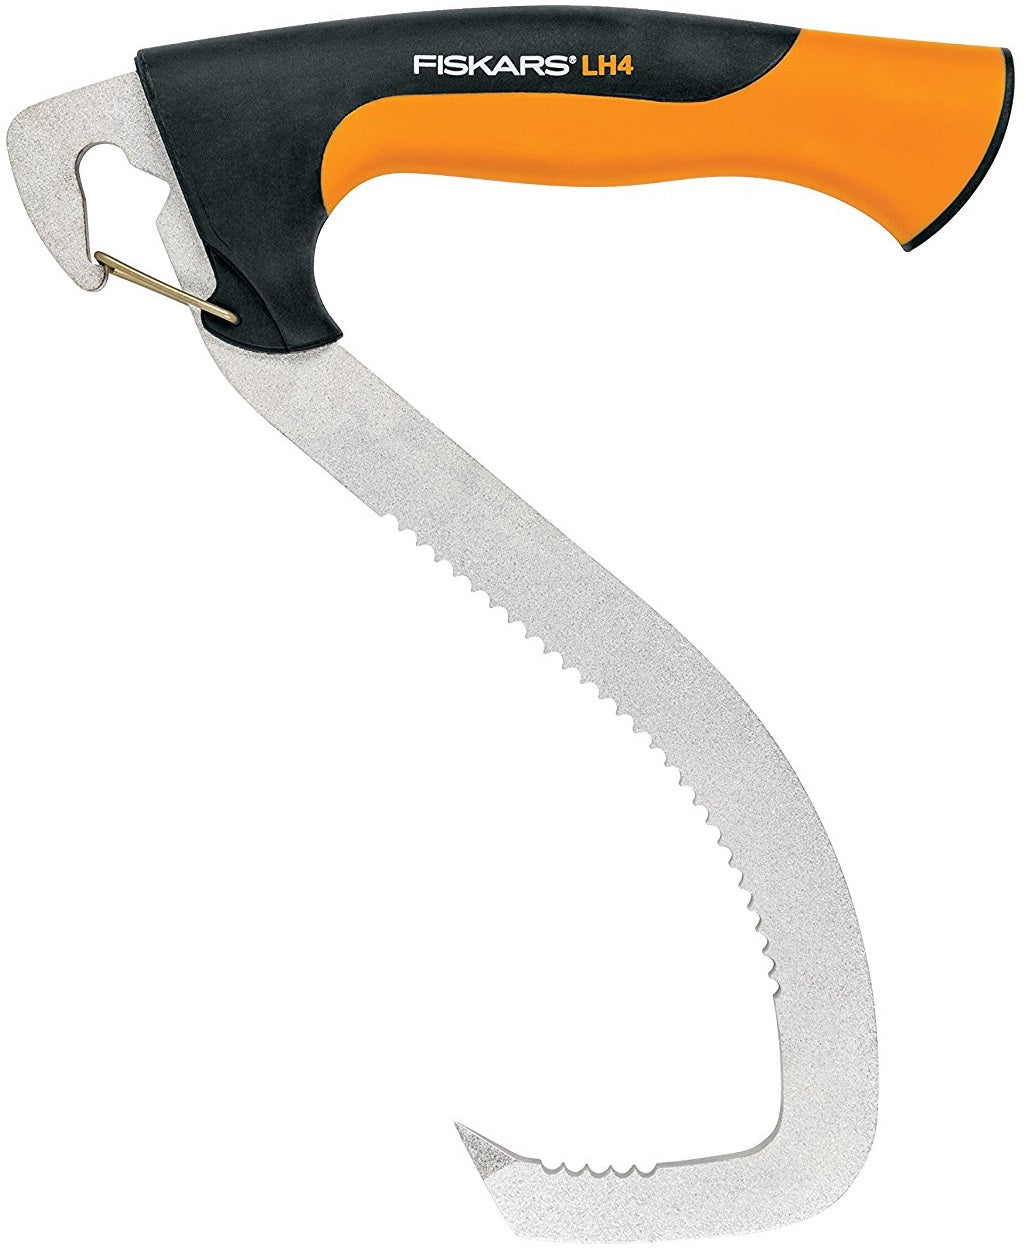 Buy fiskars log hook - Online store for lawn & garden tools, logging tools in USA, on sale, low price, discount deals, coupon code